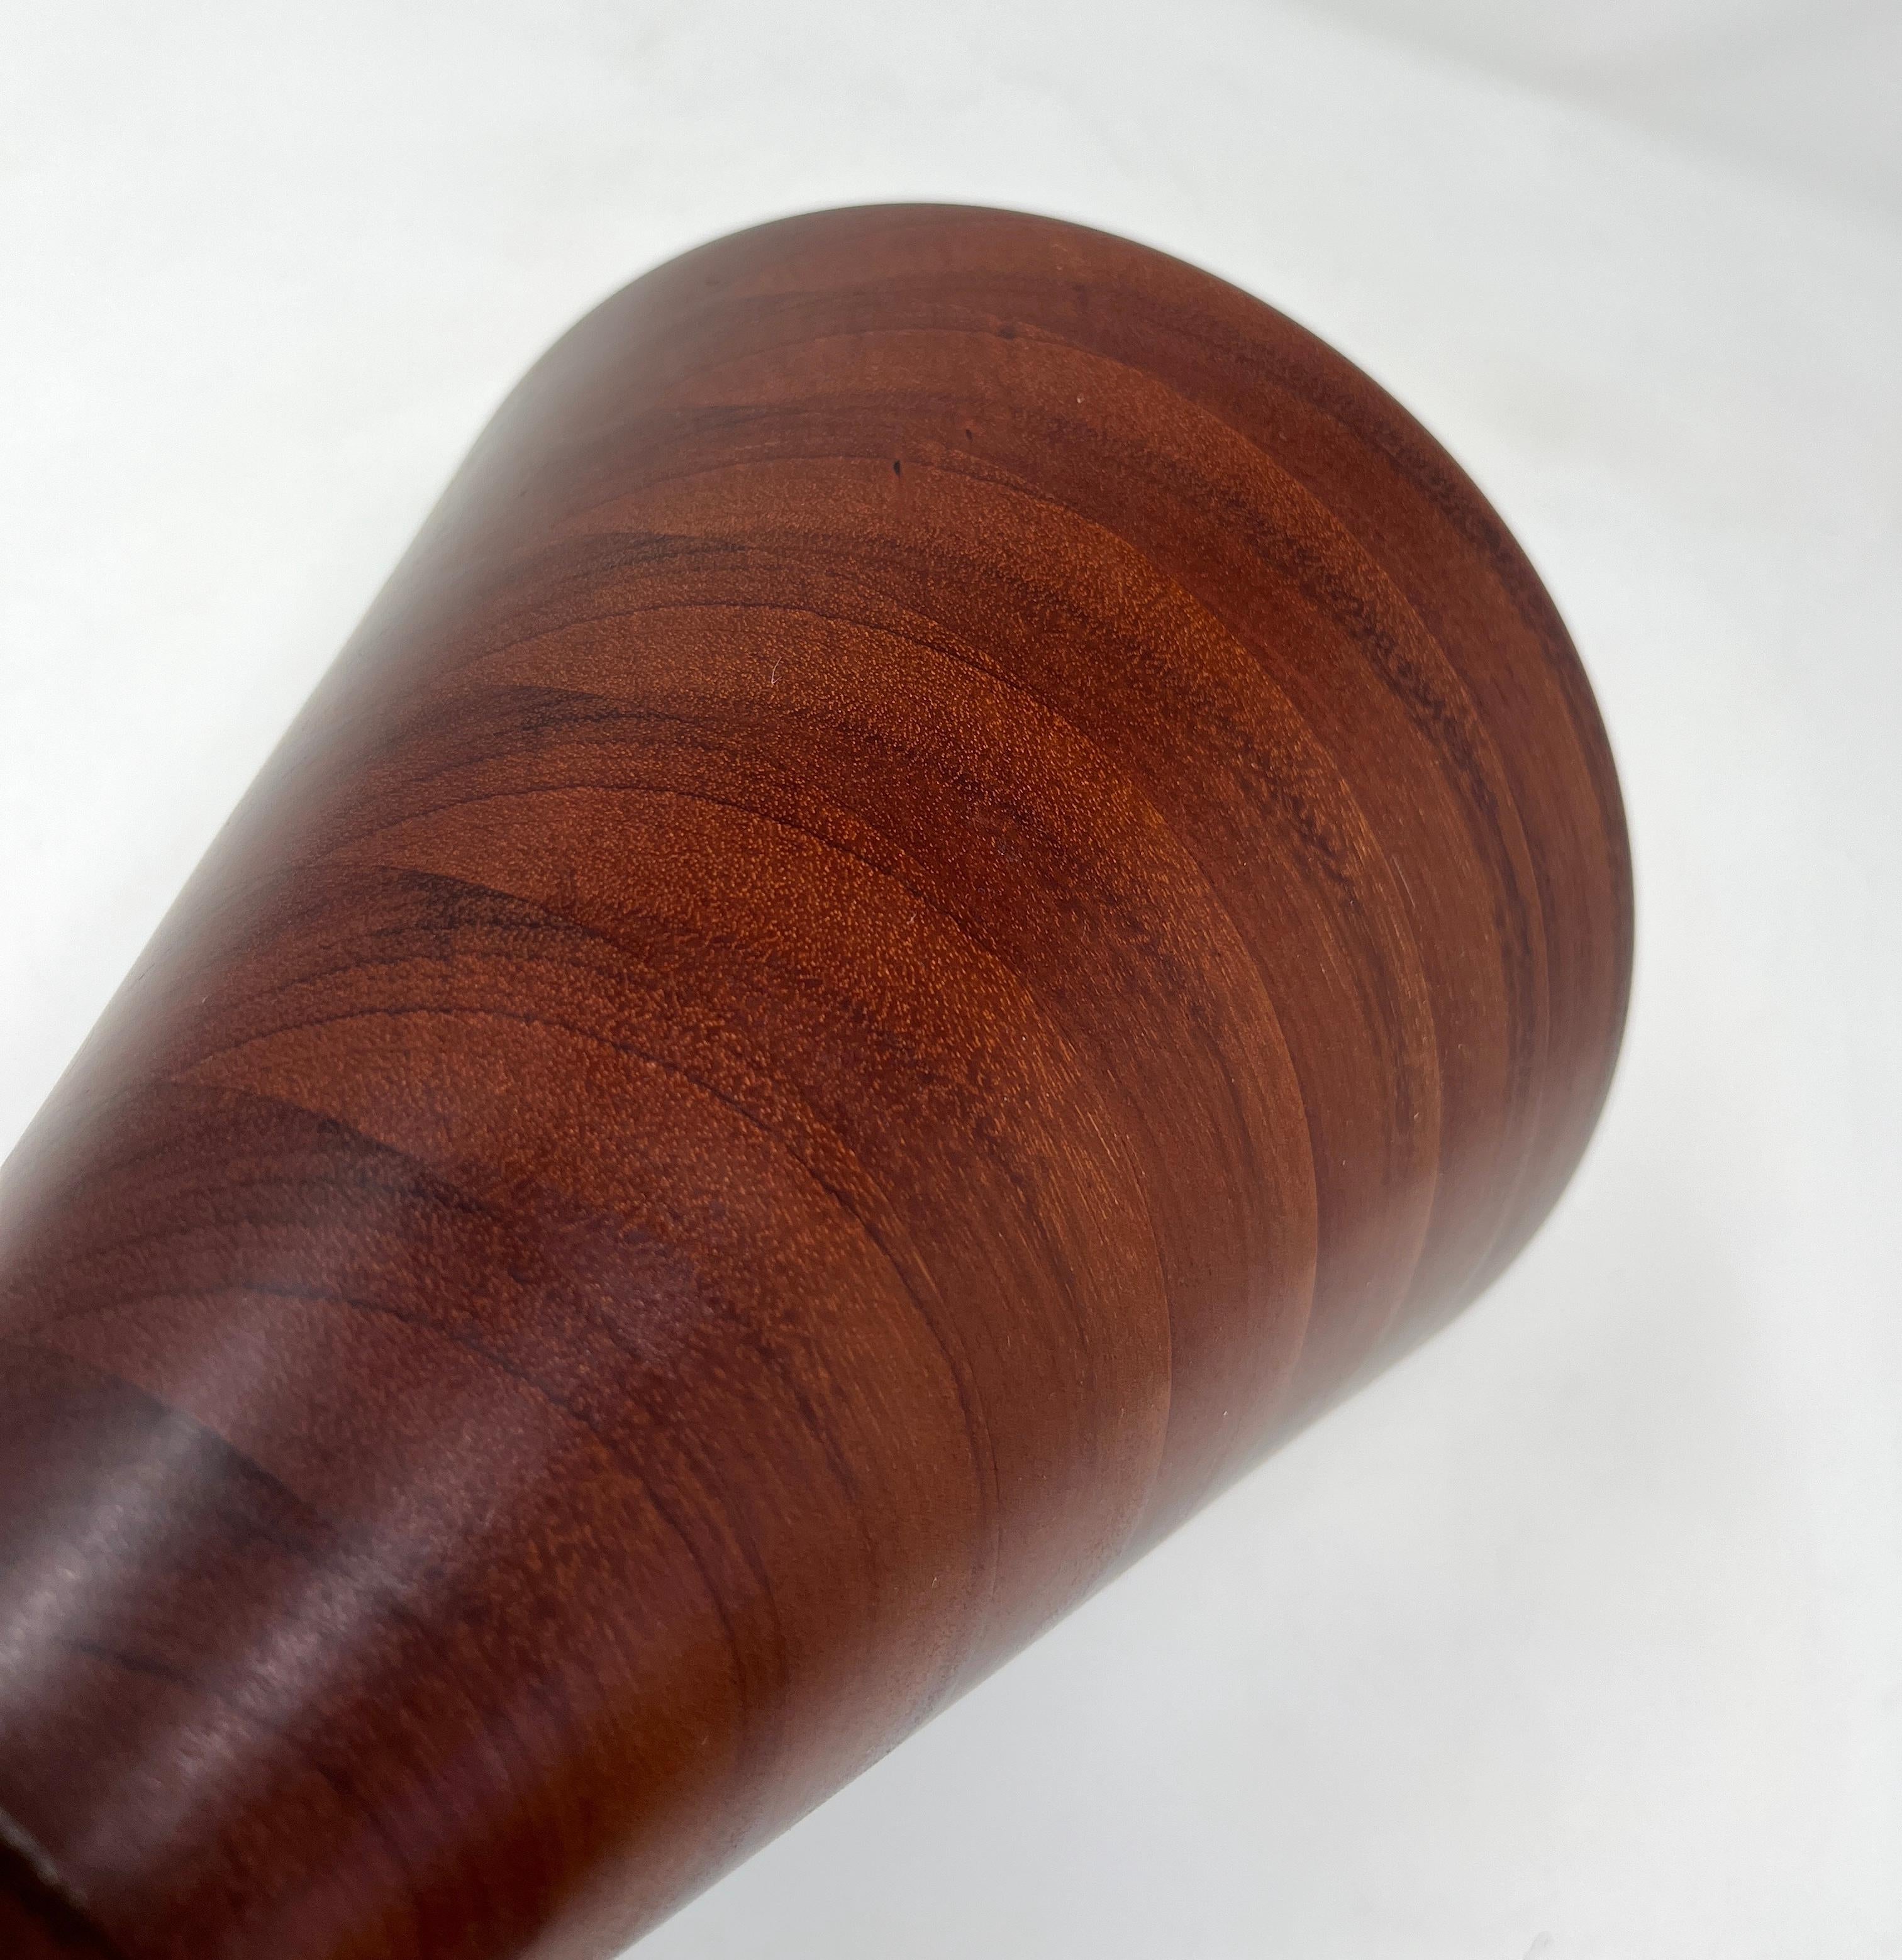 Hardwood Handcrafted Turned Wood Sculptural Vase By Lloyd Cheney, 2002 For Sale